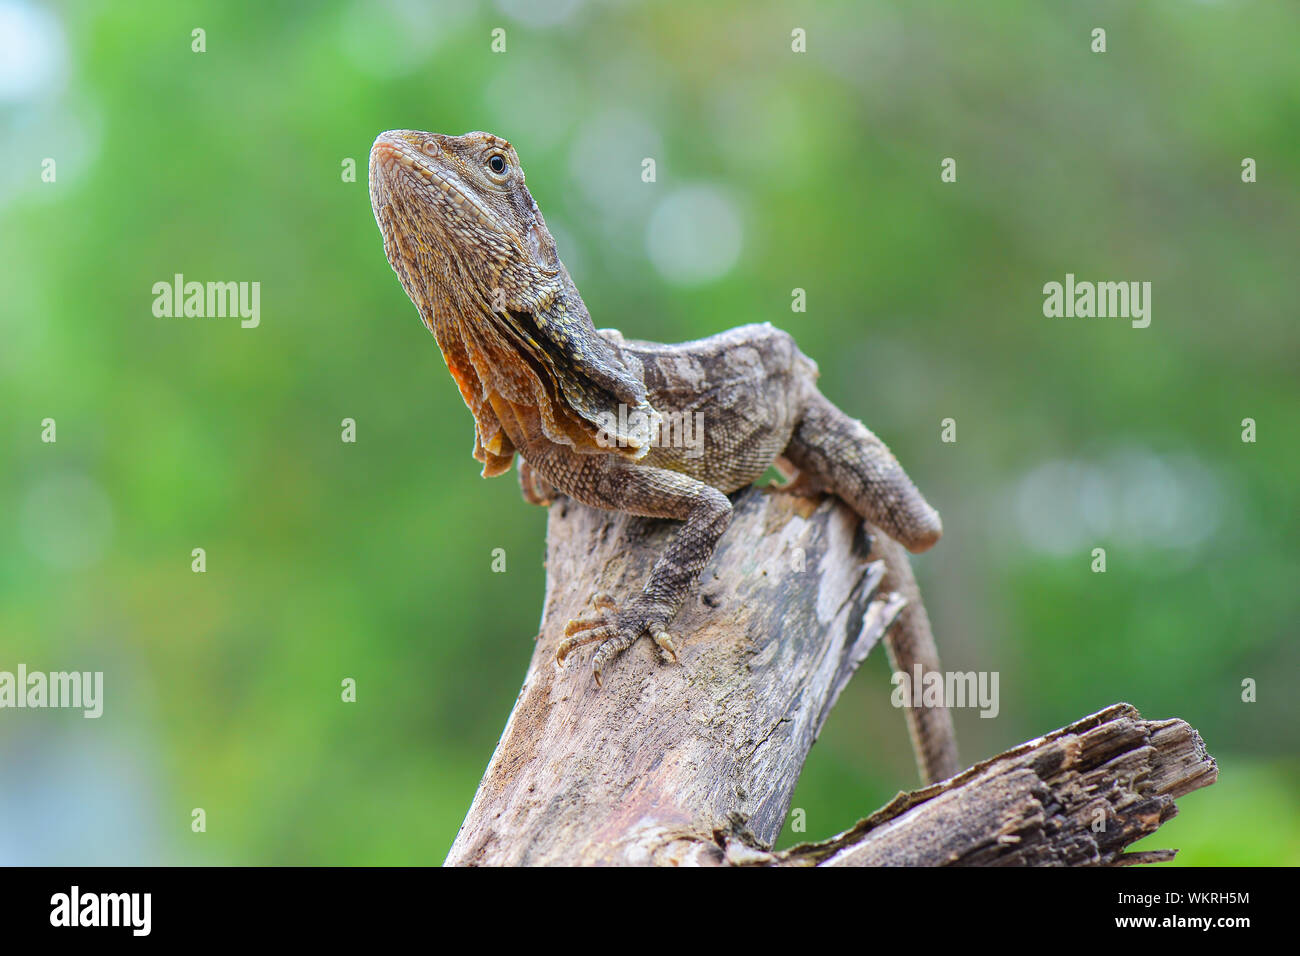 Close-up Of Frilled Lizard On Wood Stock Photo